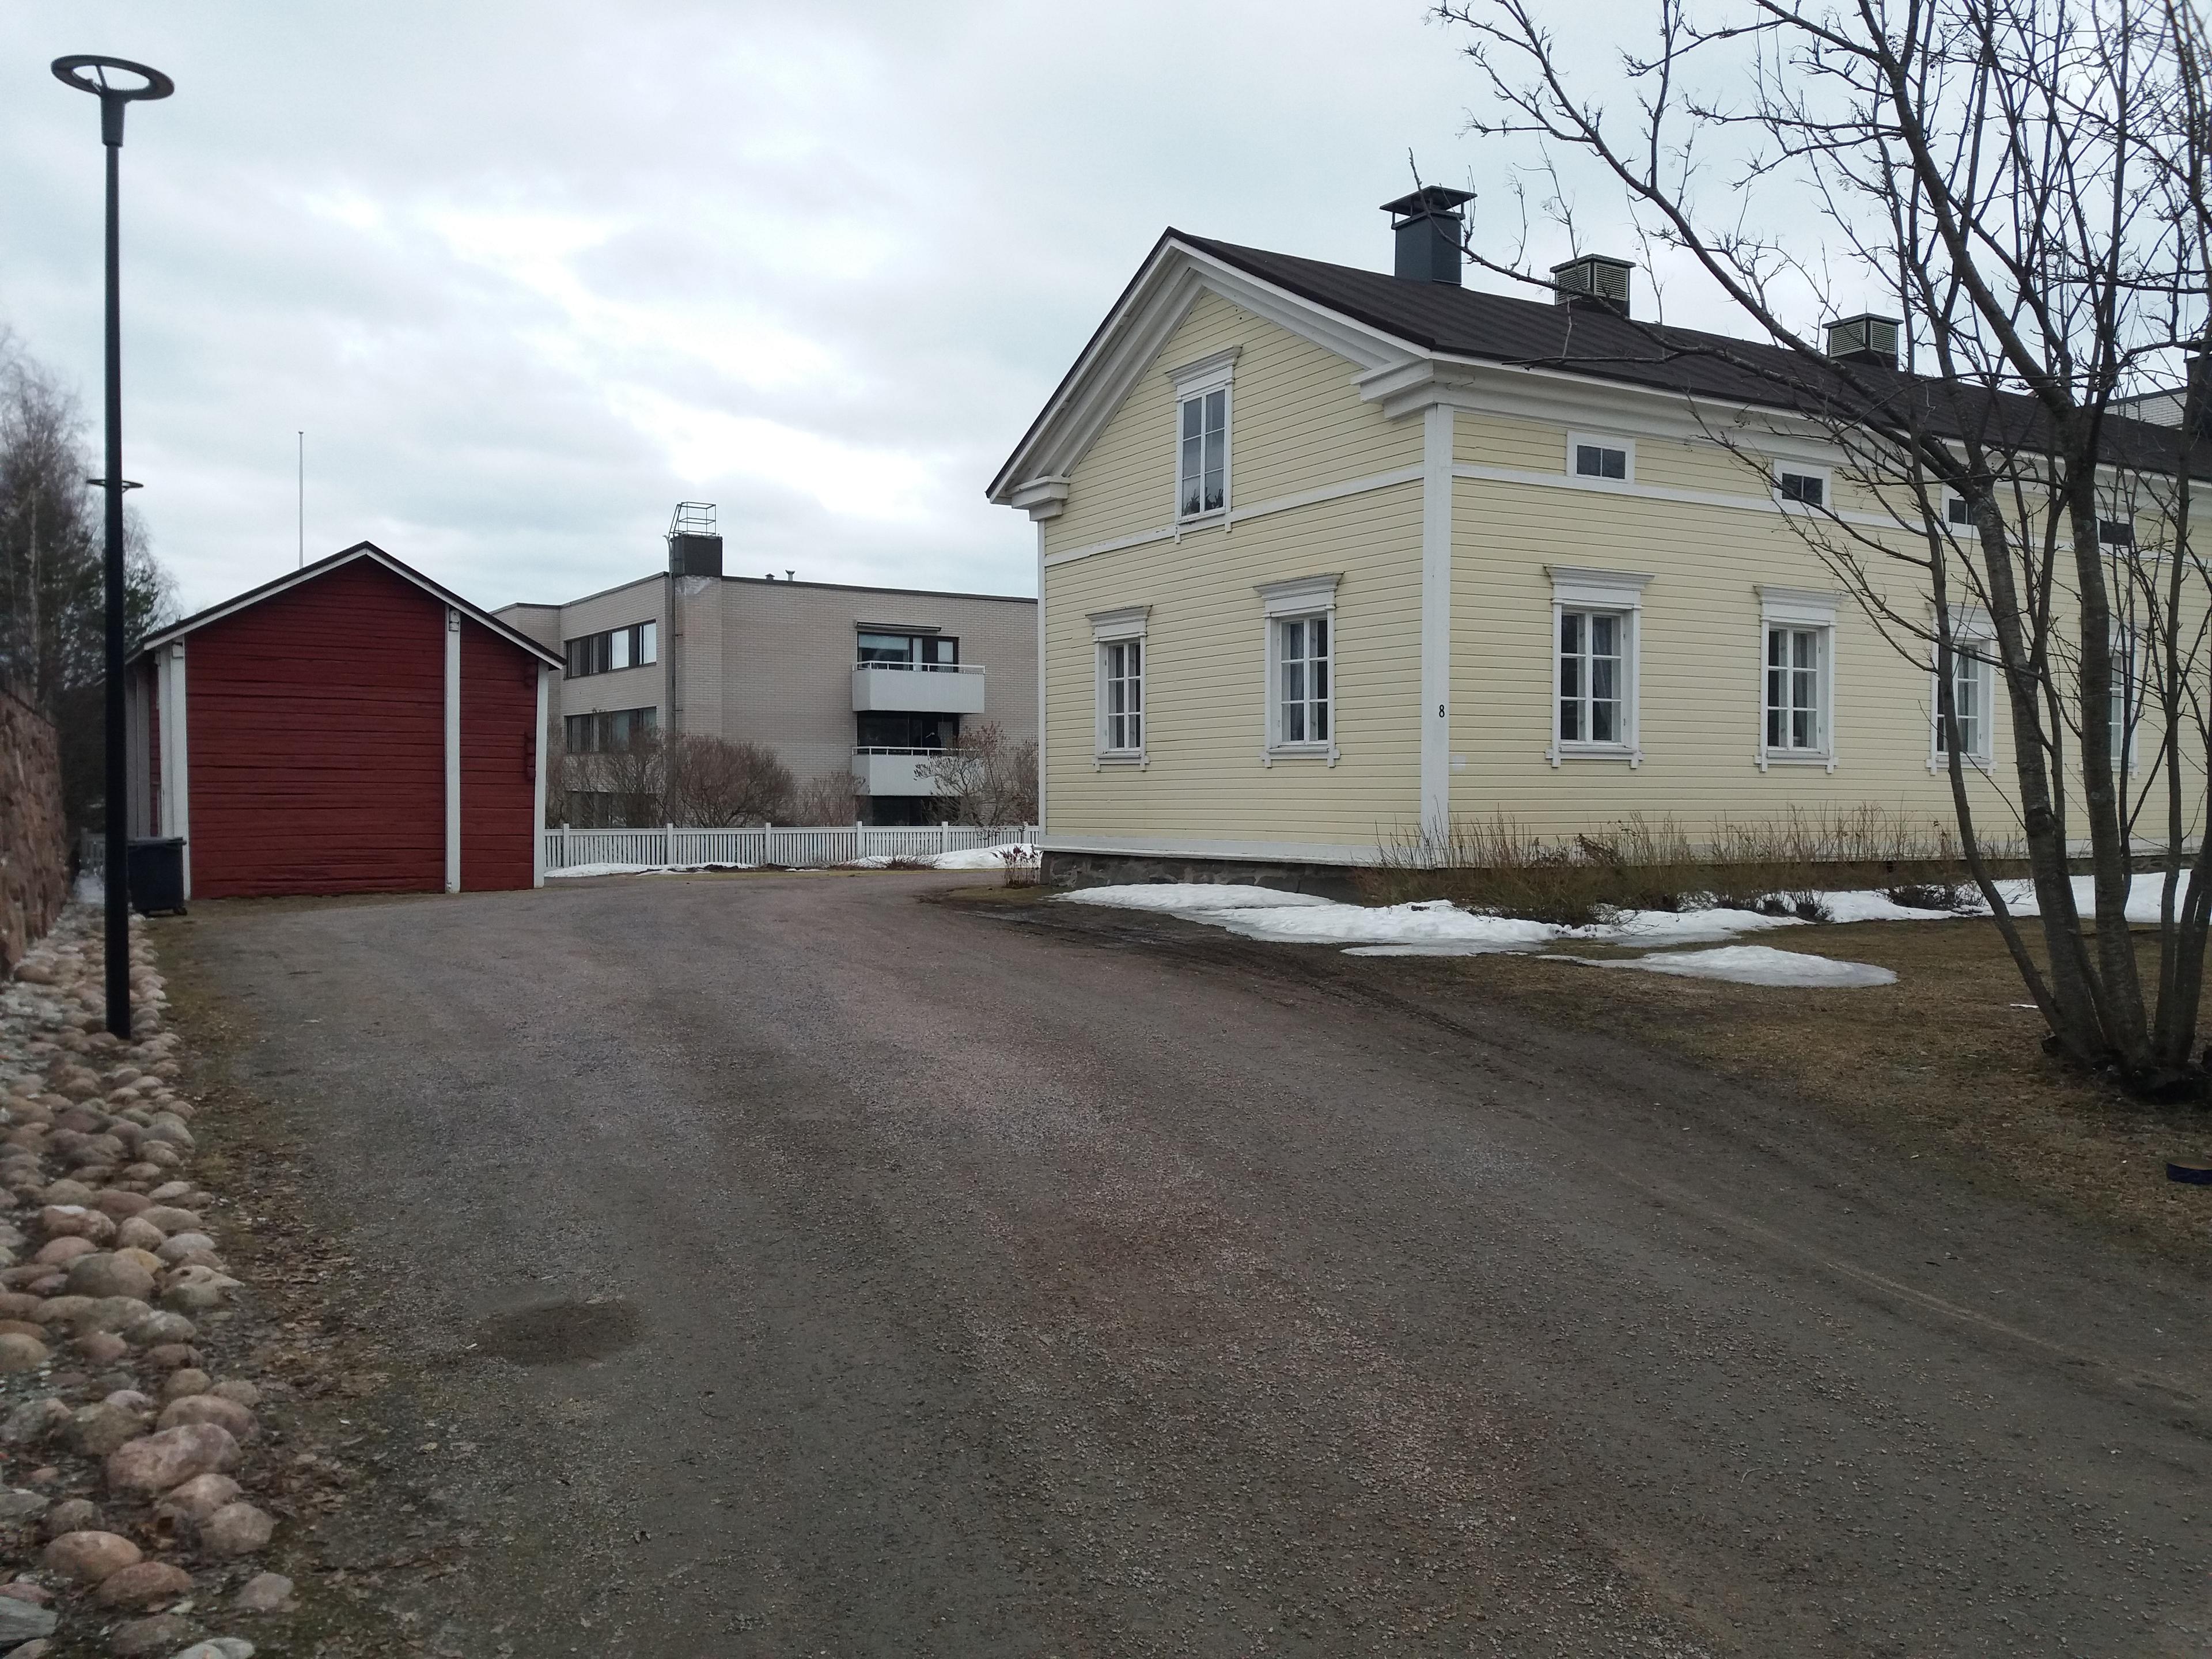 Cover image of this place Alaruokasen Talo